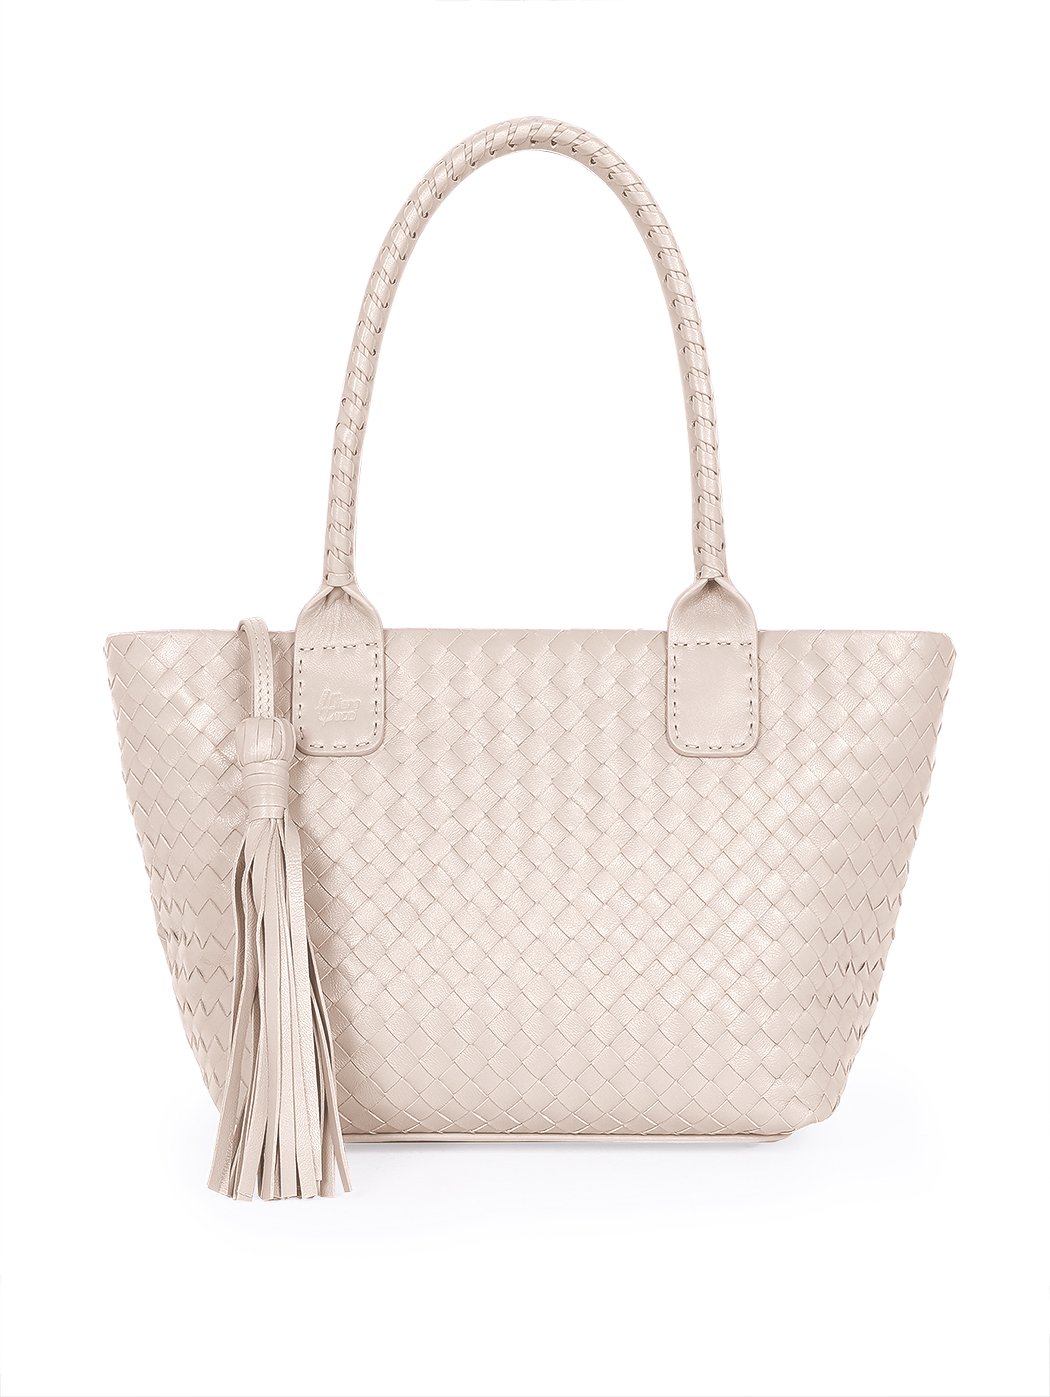 Large Top Handle Woven Leather Shoulder Tote Beige